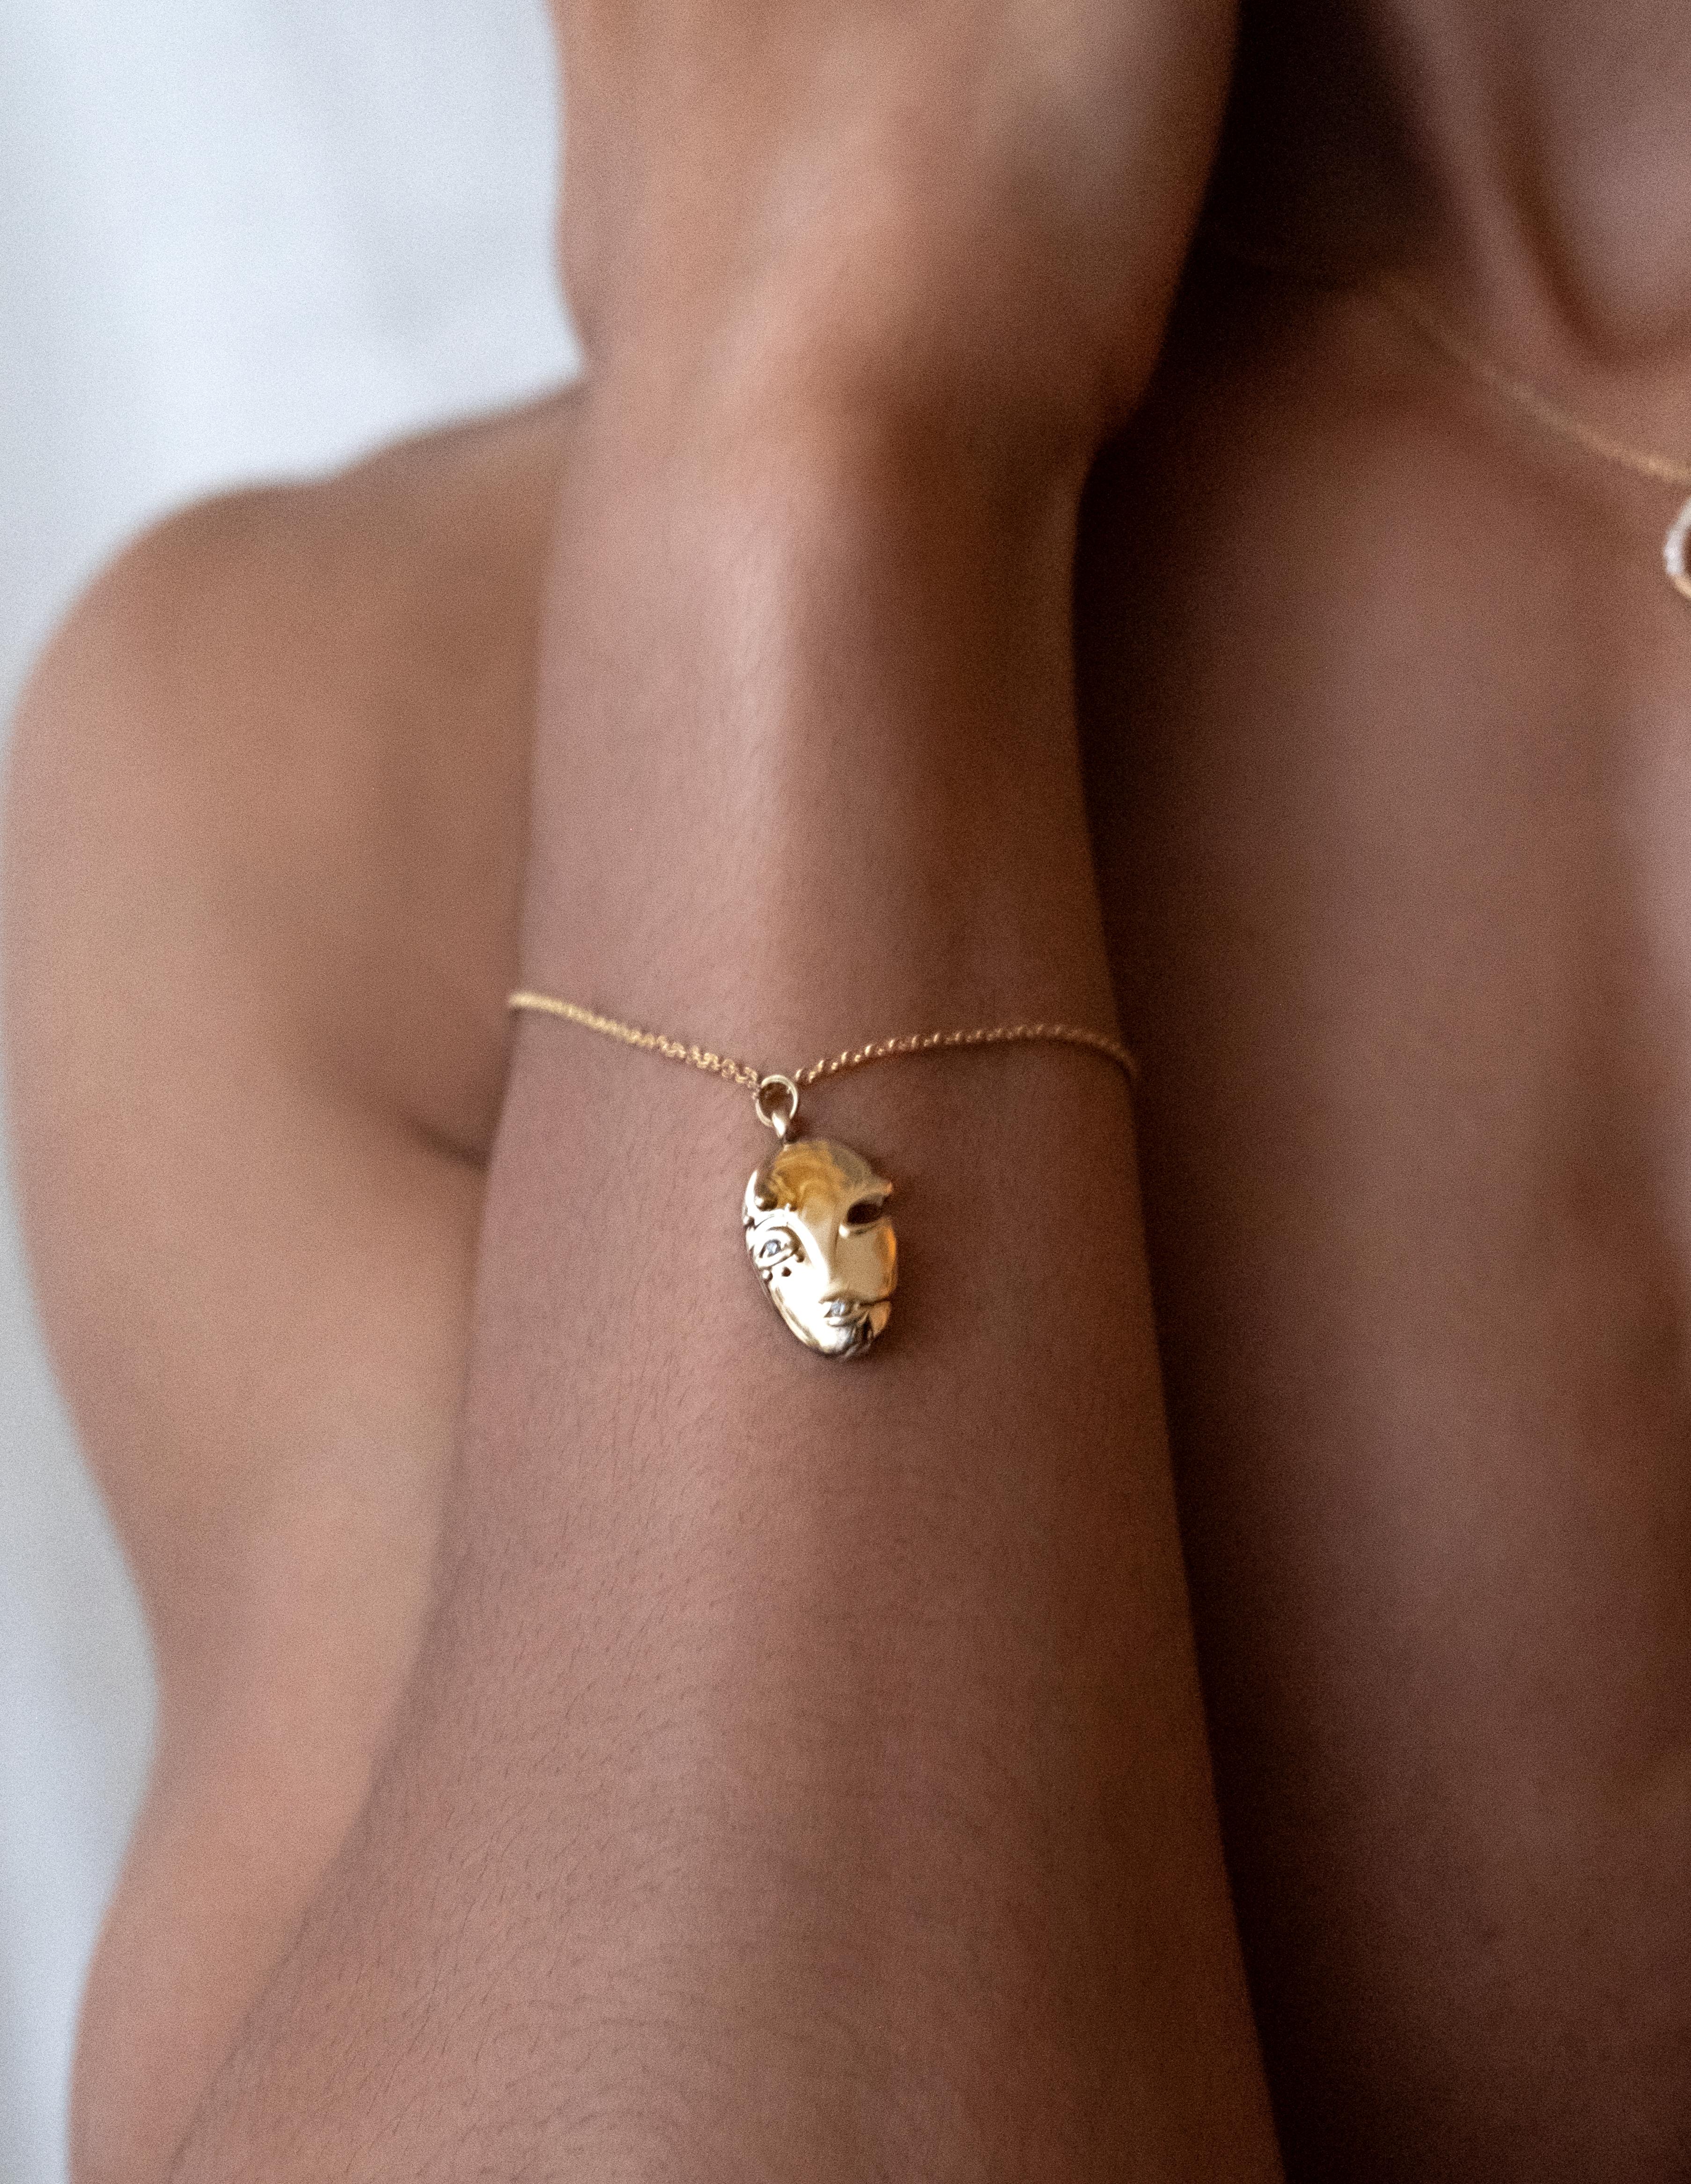 Sculptural Mask Charm Bracelet situating Brancusi’s modernity in conversation with West African sculptural traditions. Rendered in 18K Gold and set with two round cut diamonds. 1.5 inch charm on Adjustable 6 inch total length chain with lobster